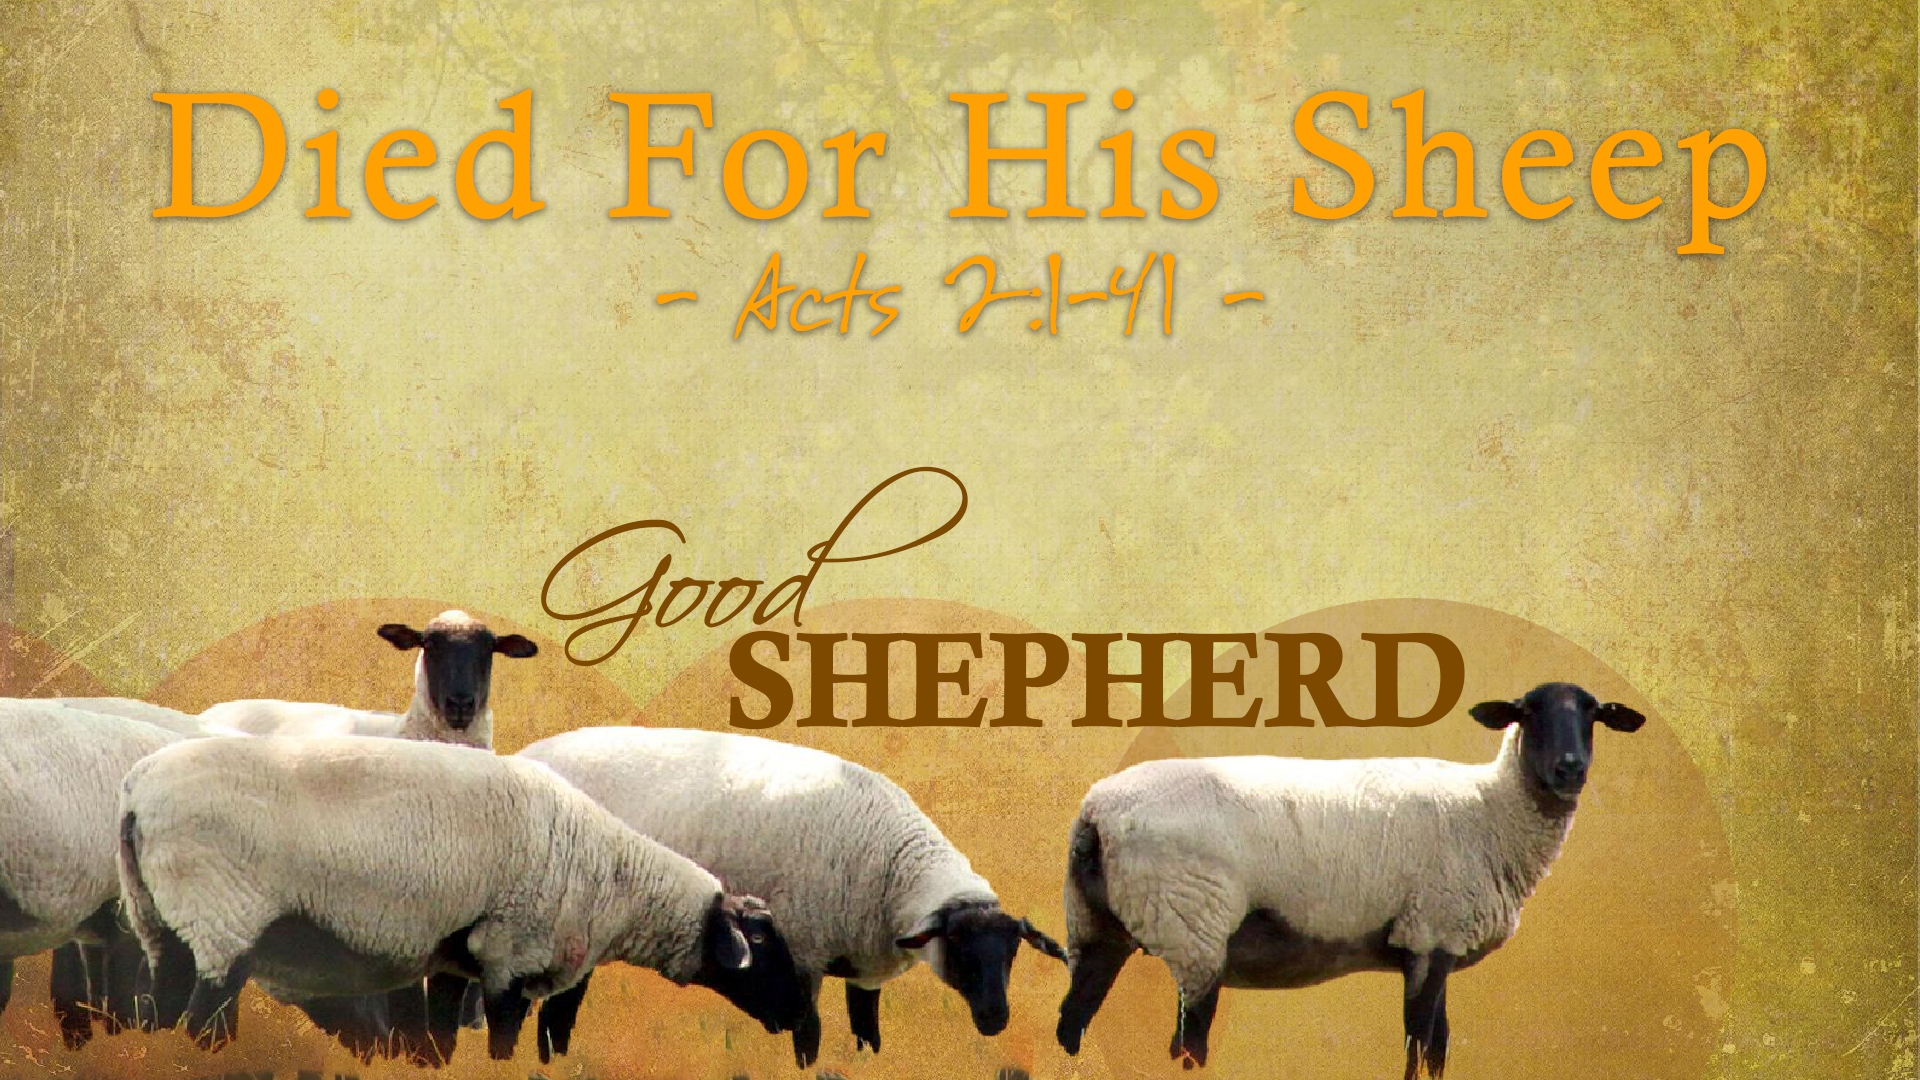  Good Shepherd, part 4: Died For His Sheep  Image